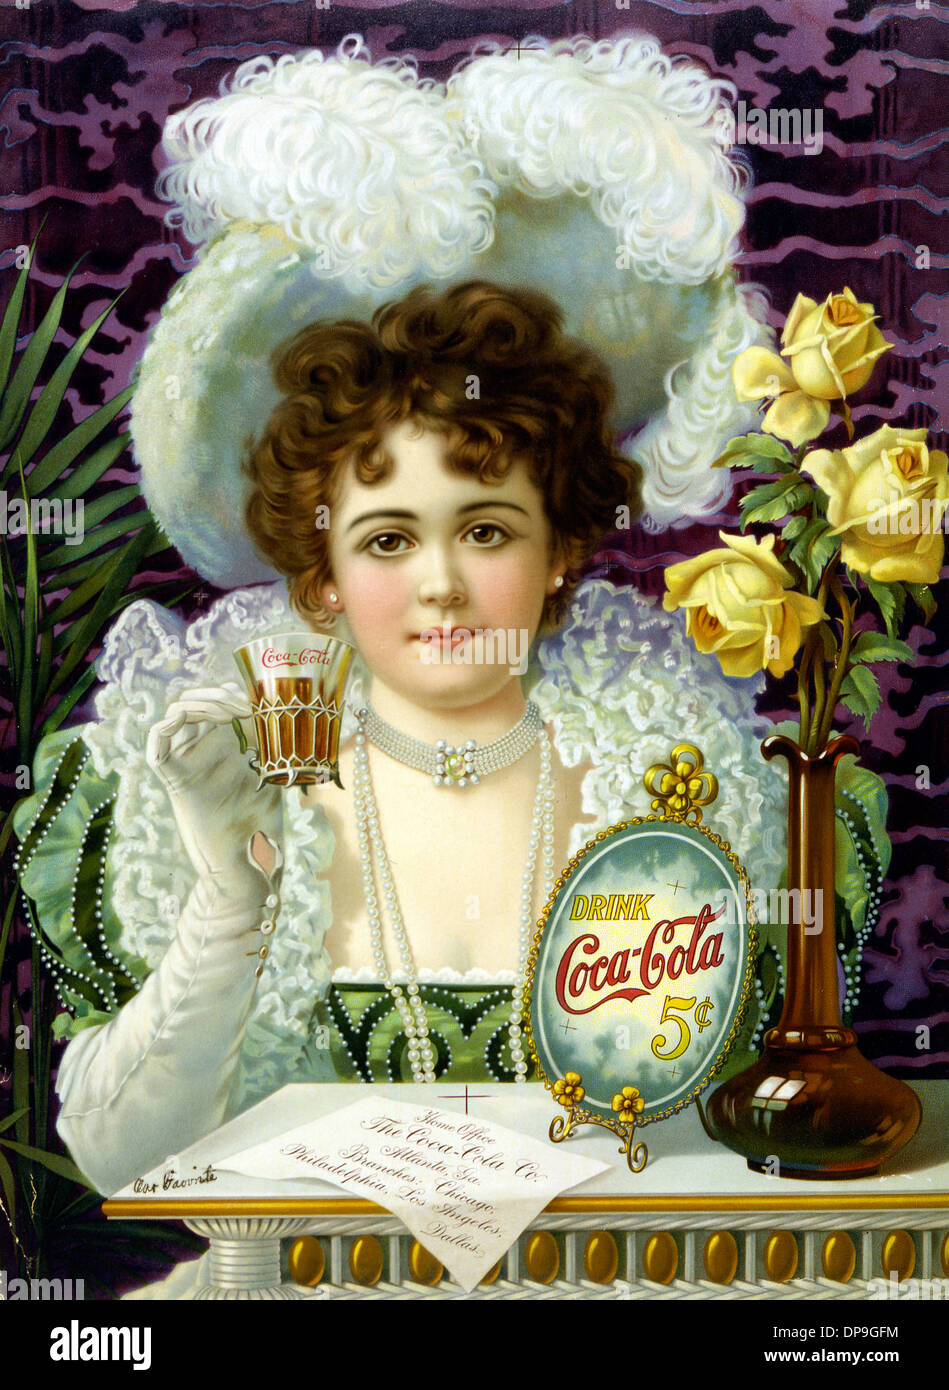 Drink Coca-Cola 5 cents historic poster Stock Photo